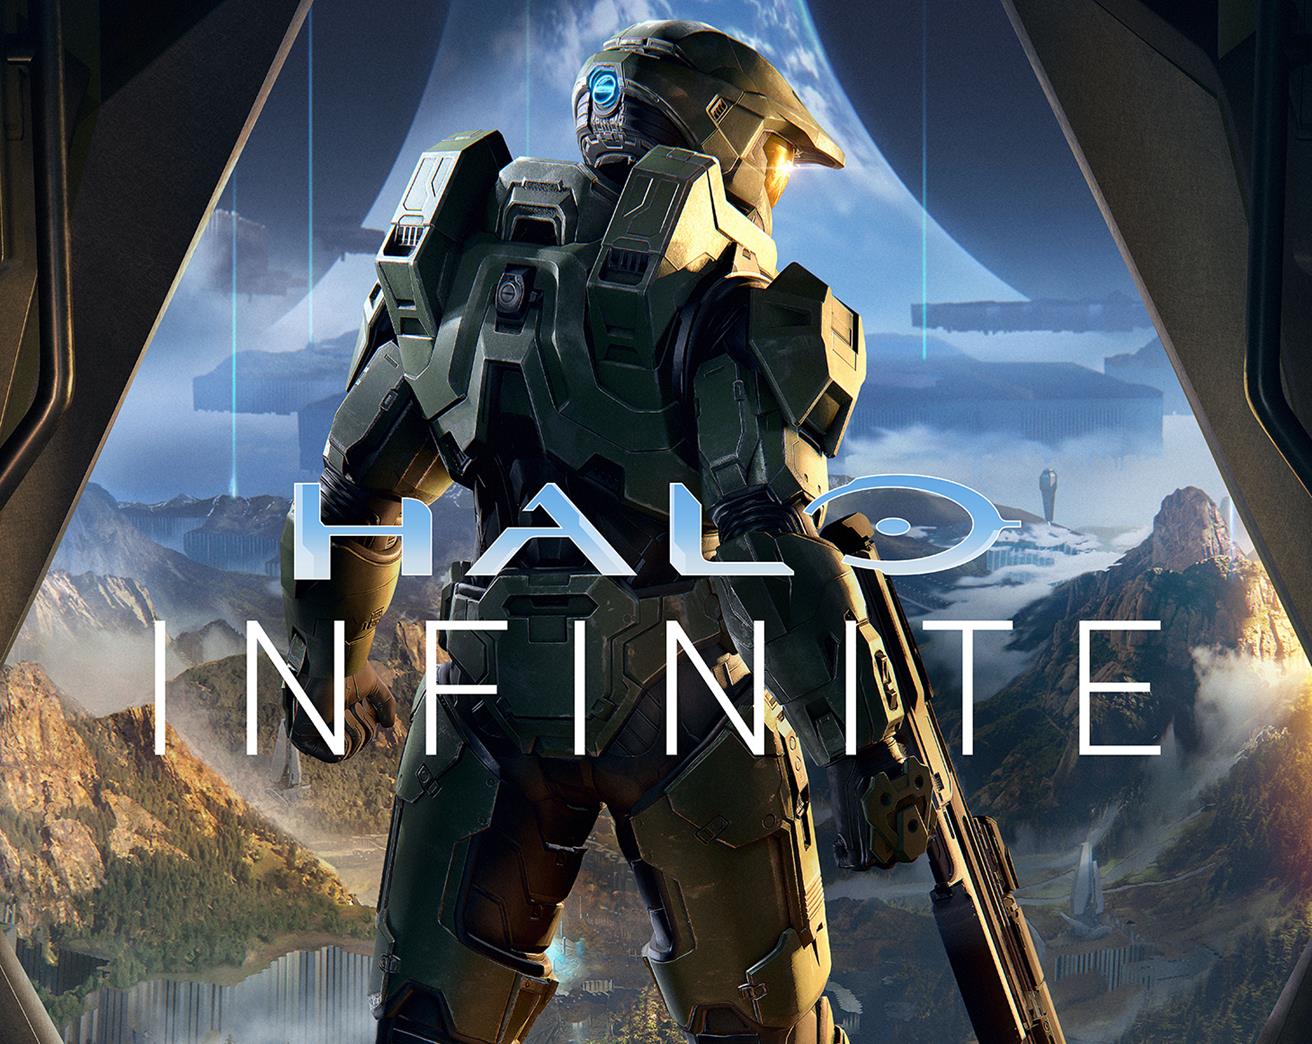 Image for First Halo Infinite gameplay coming in July